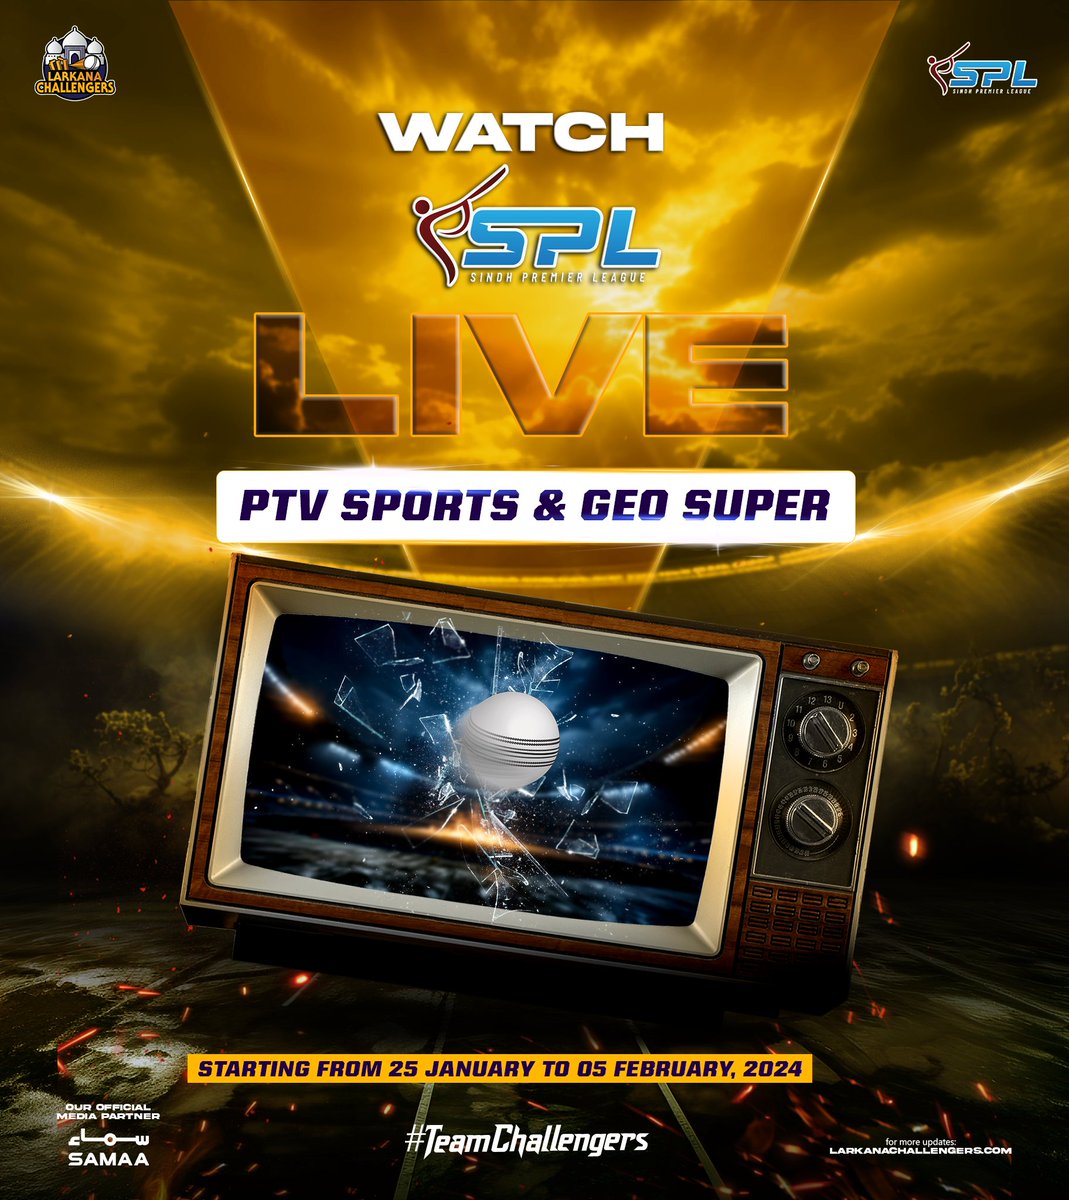 ✨WATCH #SPLSeason1 🔴 LIVE on 𝗣𝗧𝗩 𝗦𝗣𝗢𝗥𝗧𝗦 & 𝗚𝗘𝗢 𝗦𝗨𝗣𝗘𝗥.
The most anticipated and ⚡electrifying cricket🏏 event will start from 25th January to 5th February 2024.

 #SPL #TeamChallengers #LarkanaChallengers💜💜 #LarkanaChallengers